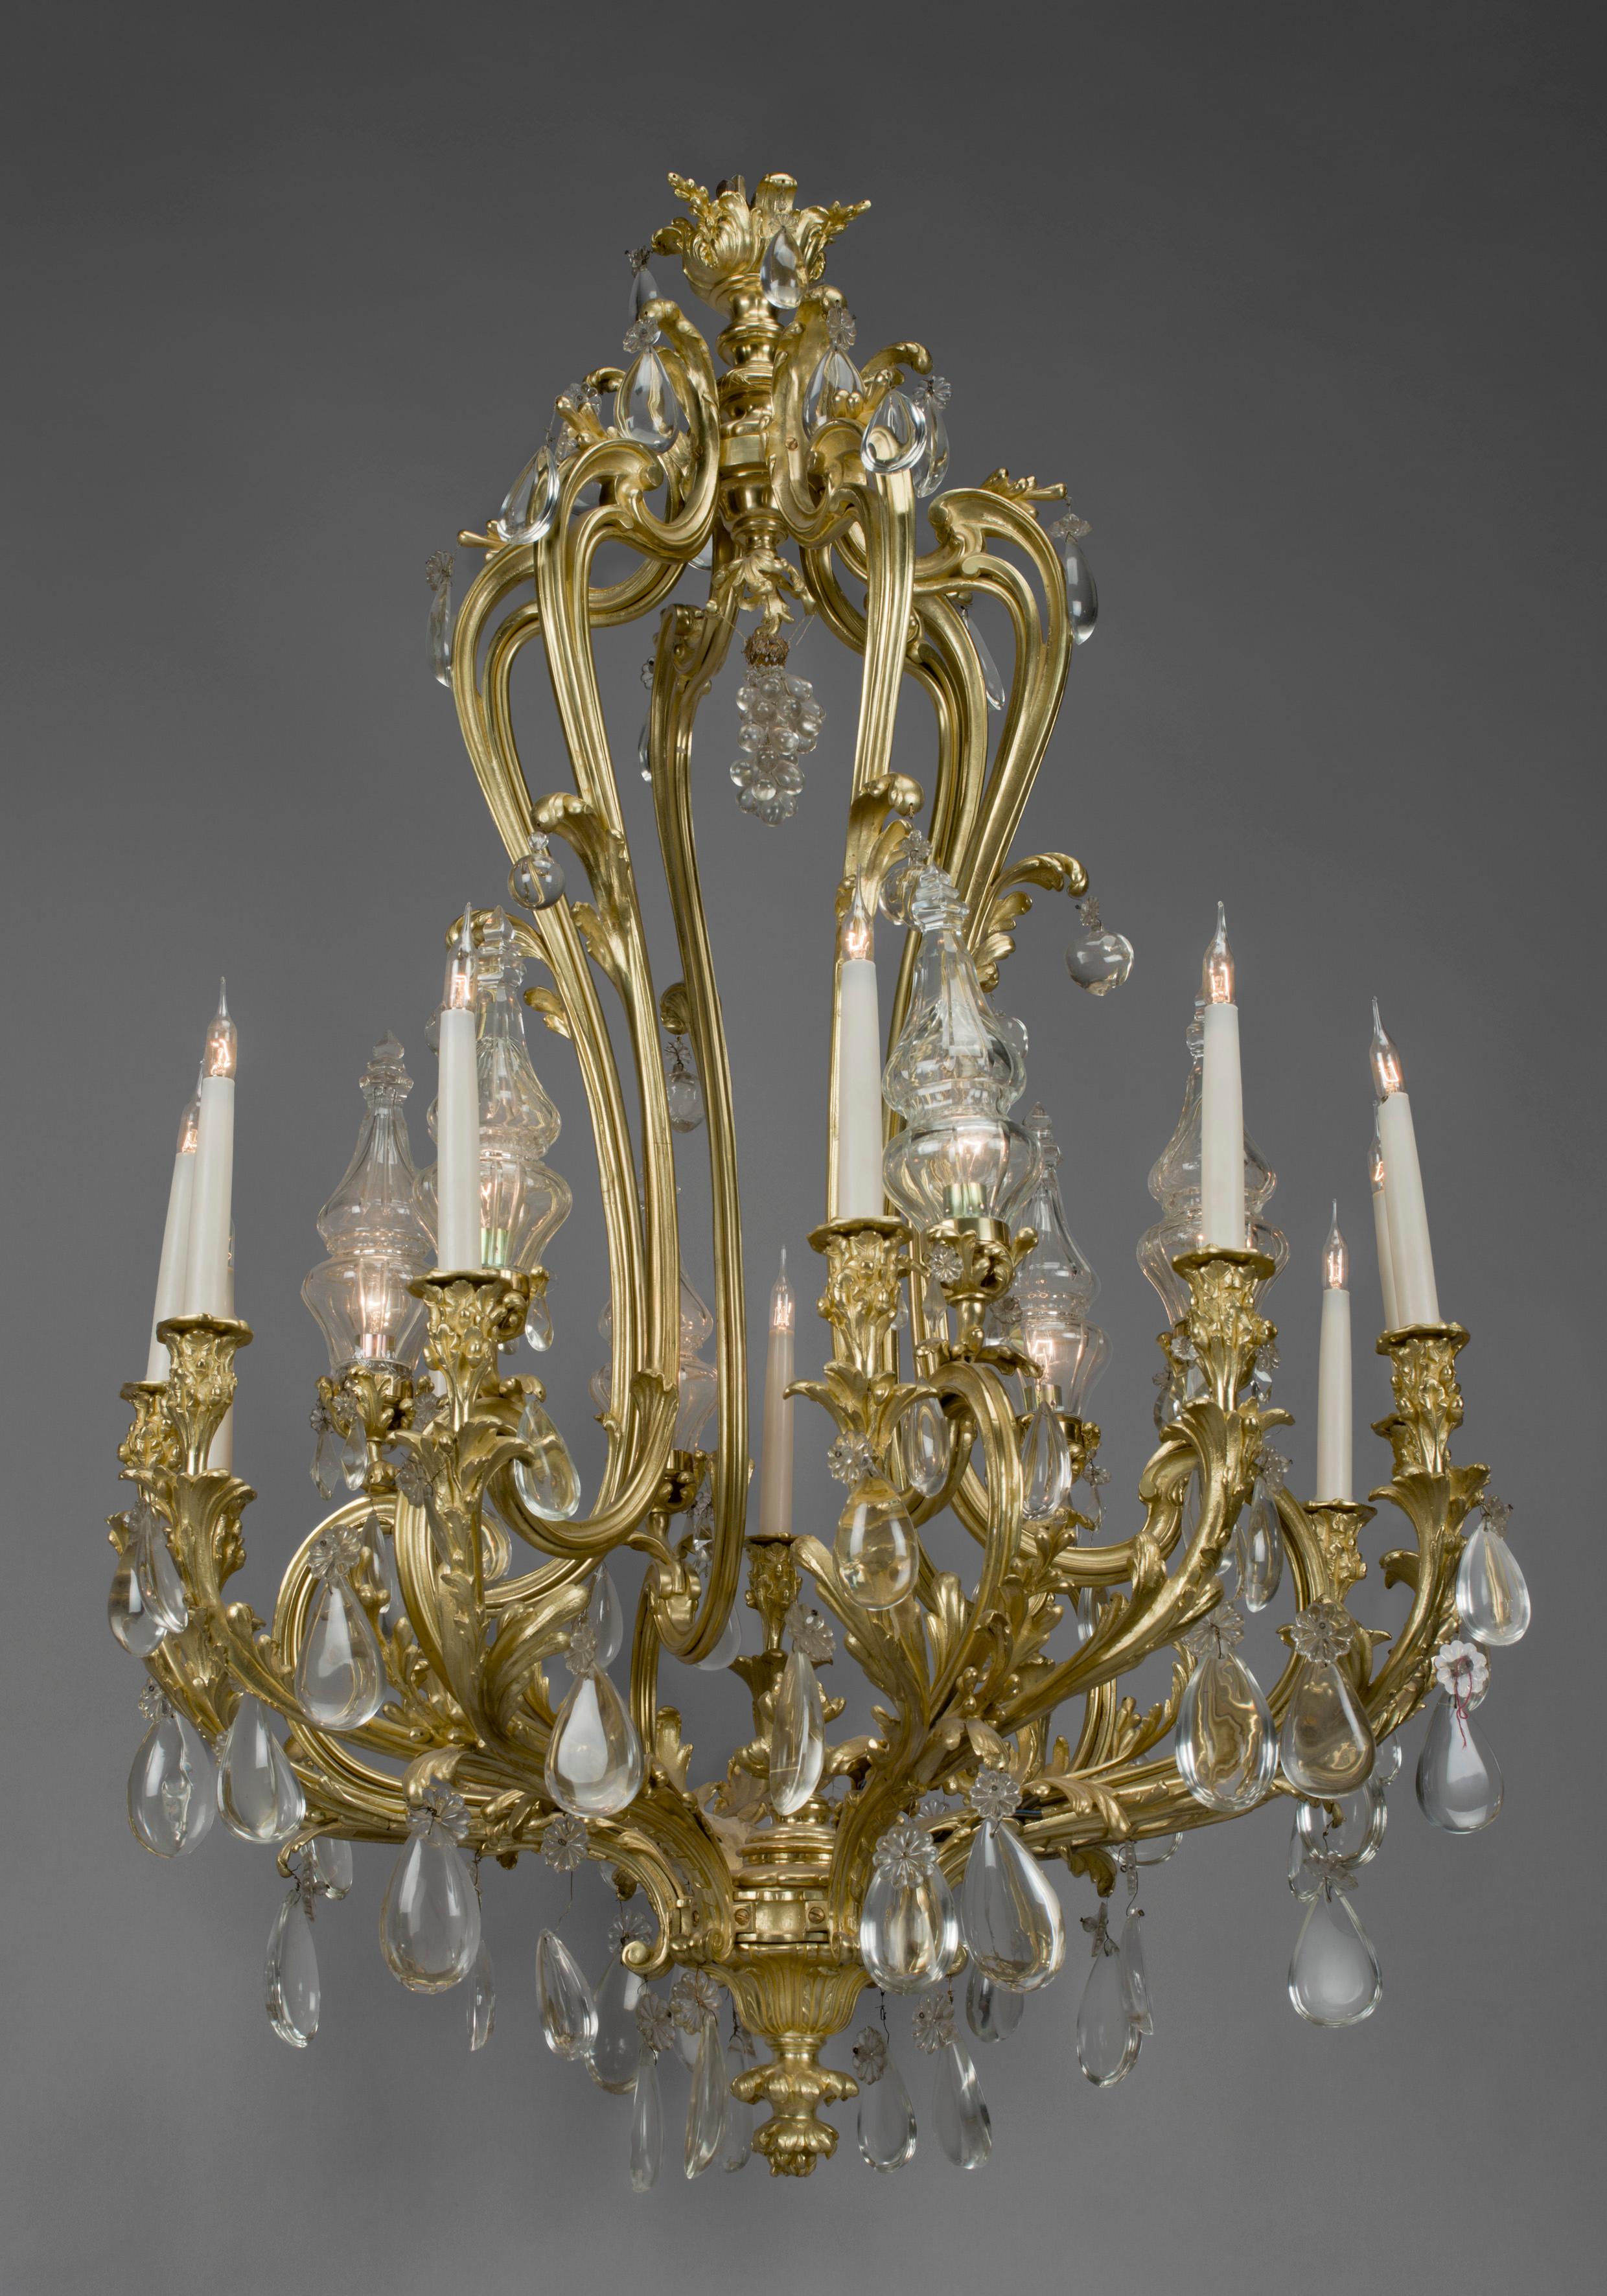 An Important Louis XV style twelve-light rock crystal and gilt-bronze chandelier.

French, circa 1850. 

An important Louis XV style twelve-light rock crystal and gilt-bronze chandelier, surmounted by a floral corona, issuing six scrolling